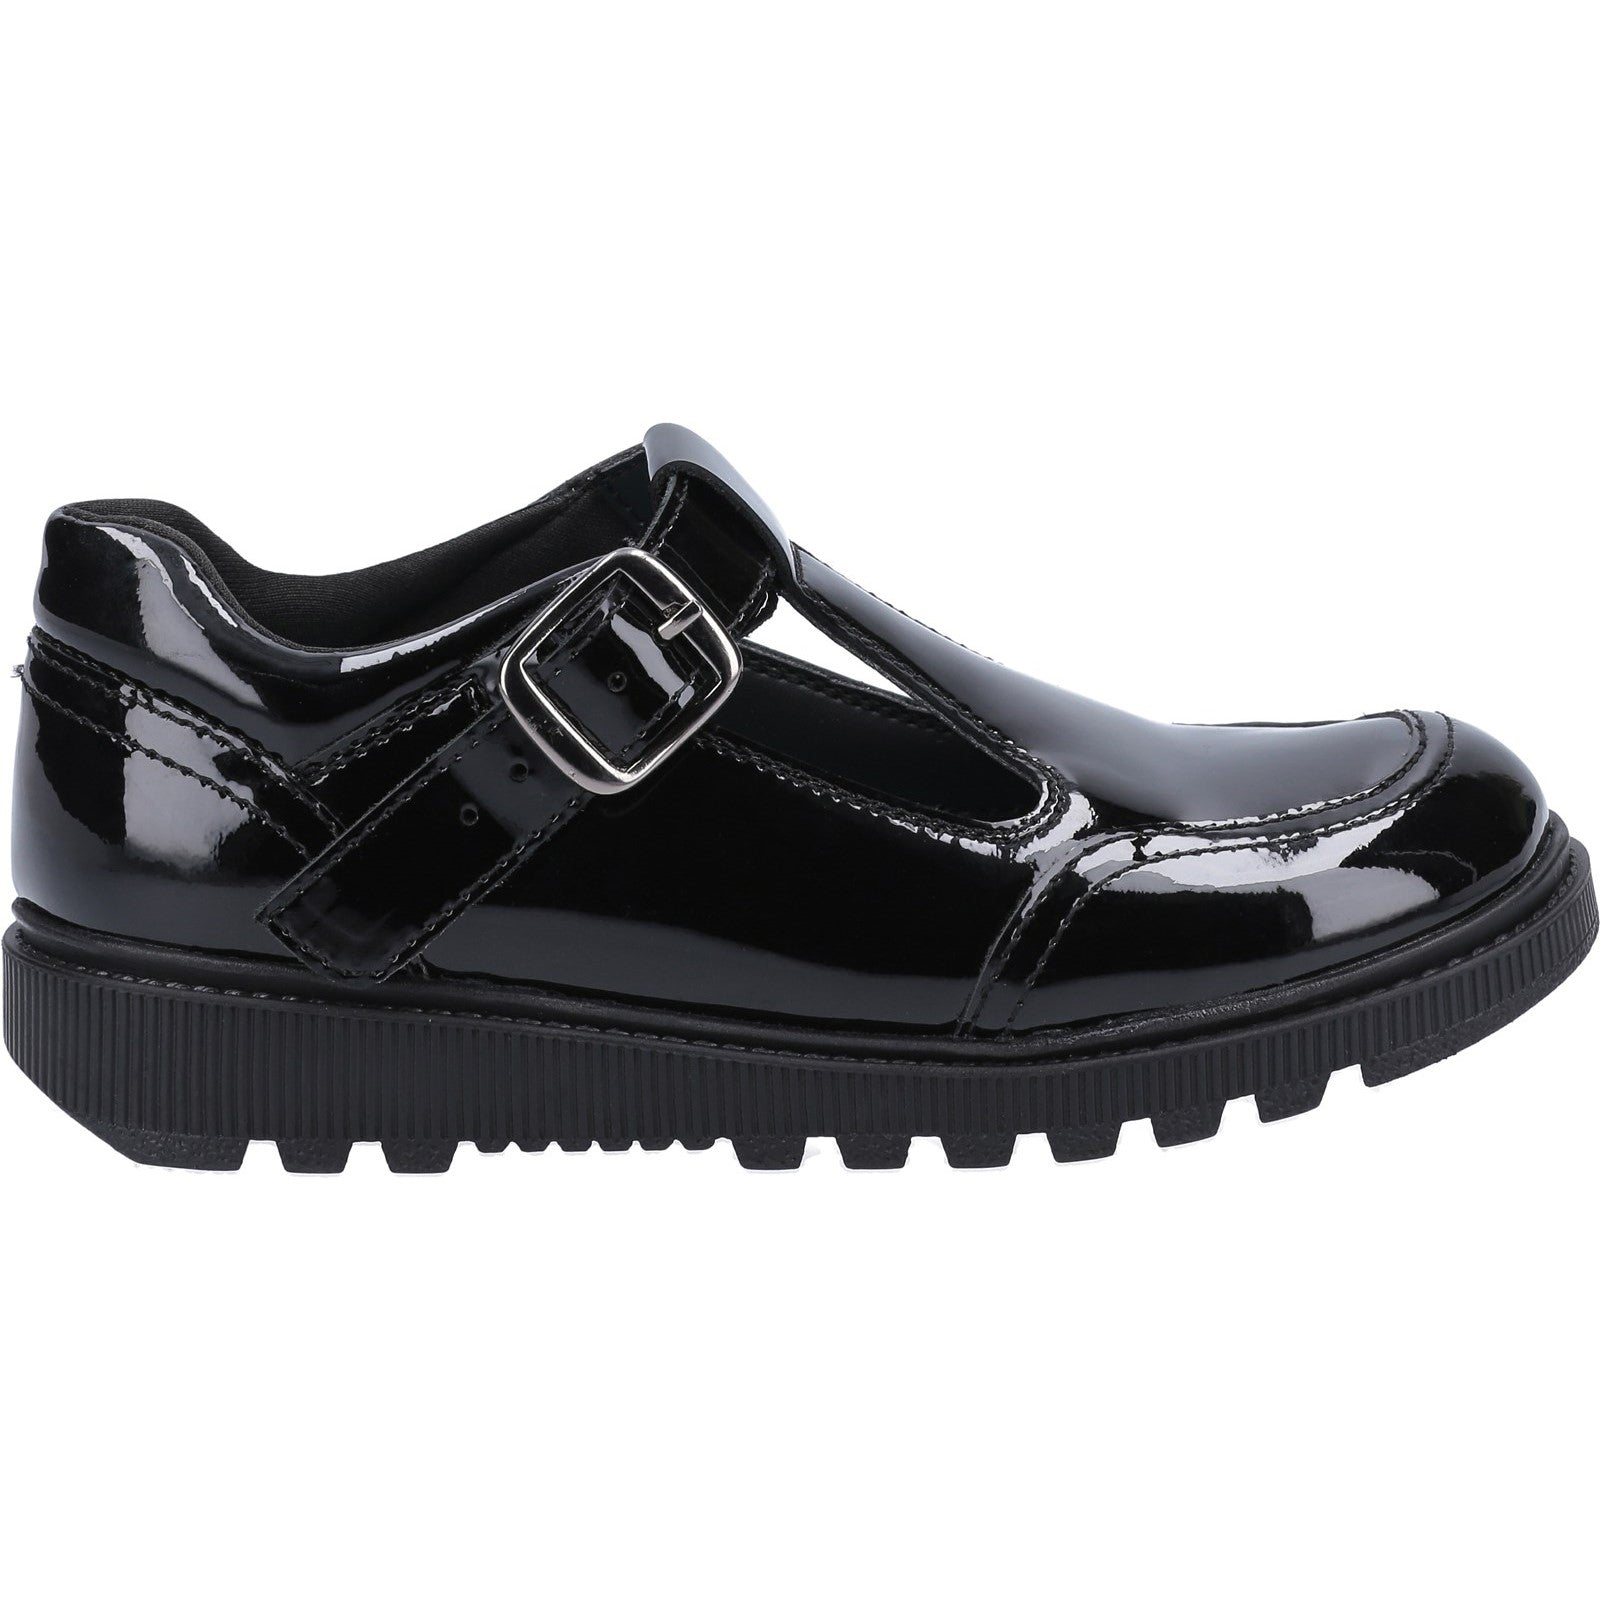 Hush Puppies Girls Kerry Patent Leather School Shoes - Black